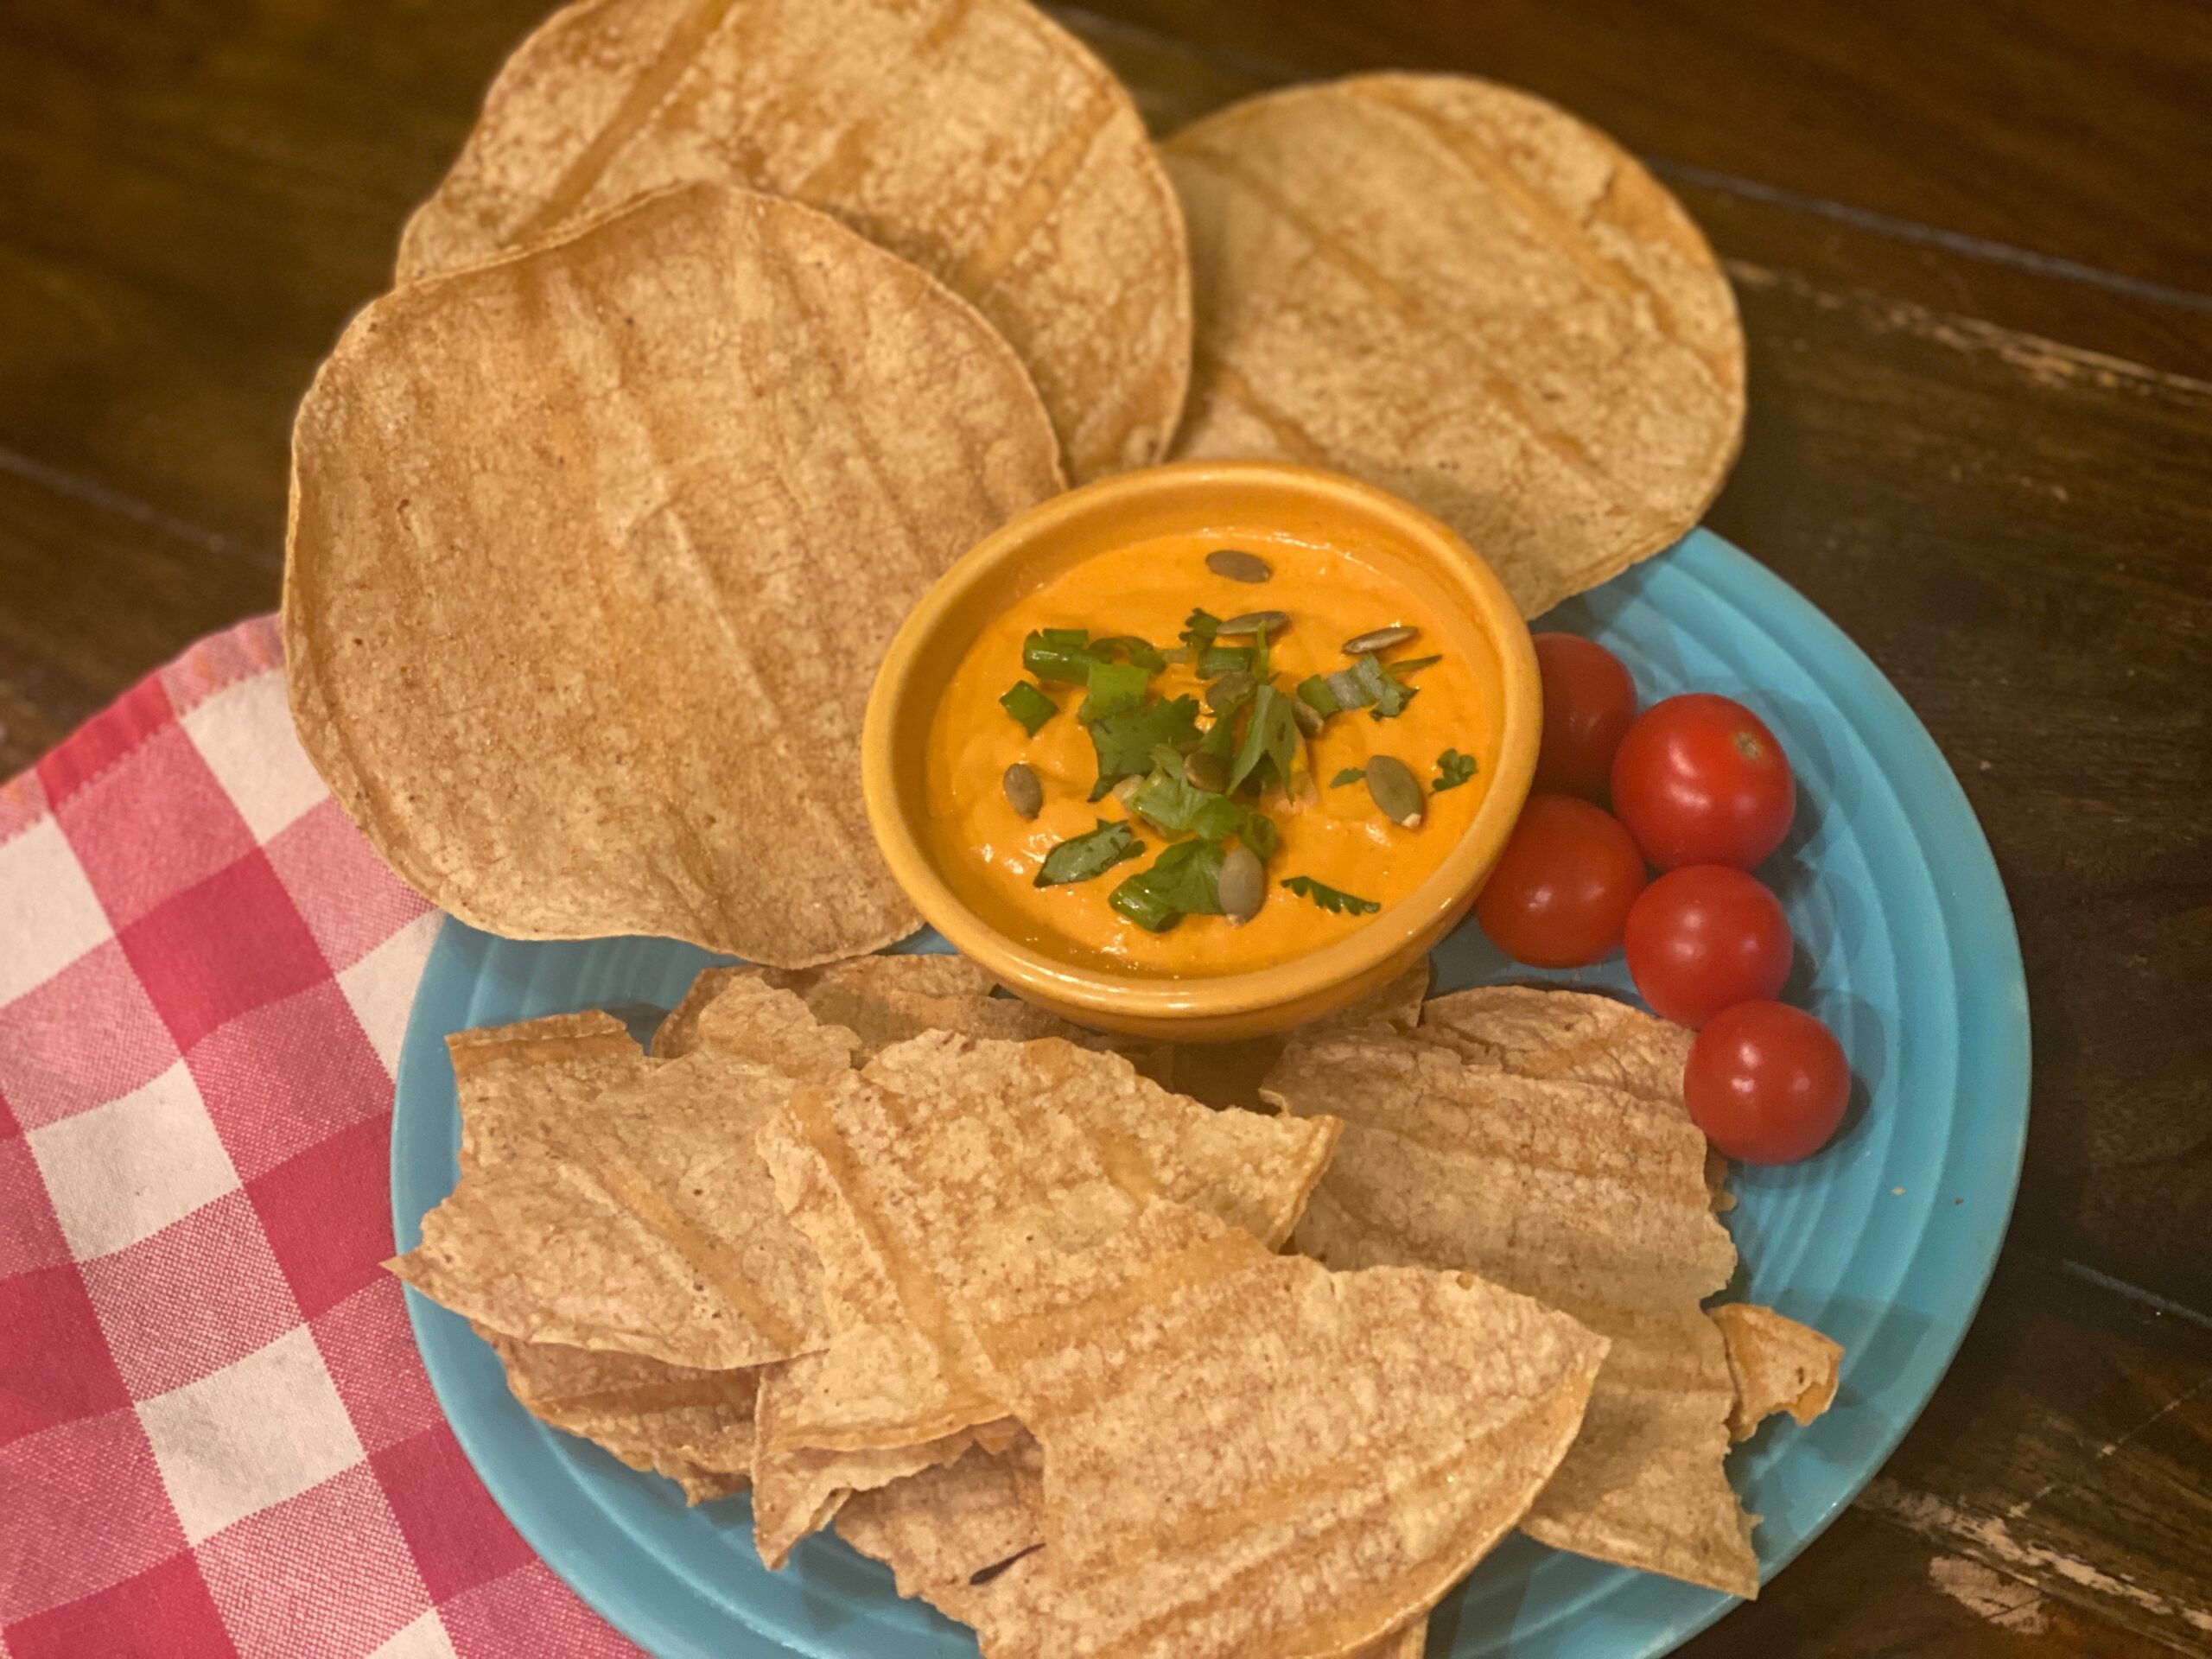 Photograph of Baked tortilla chips